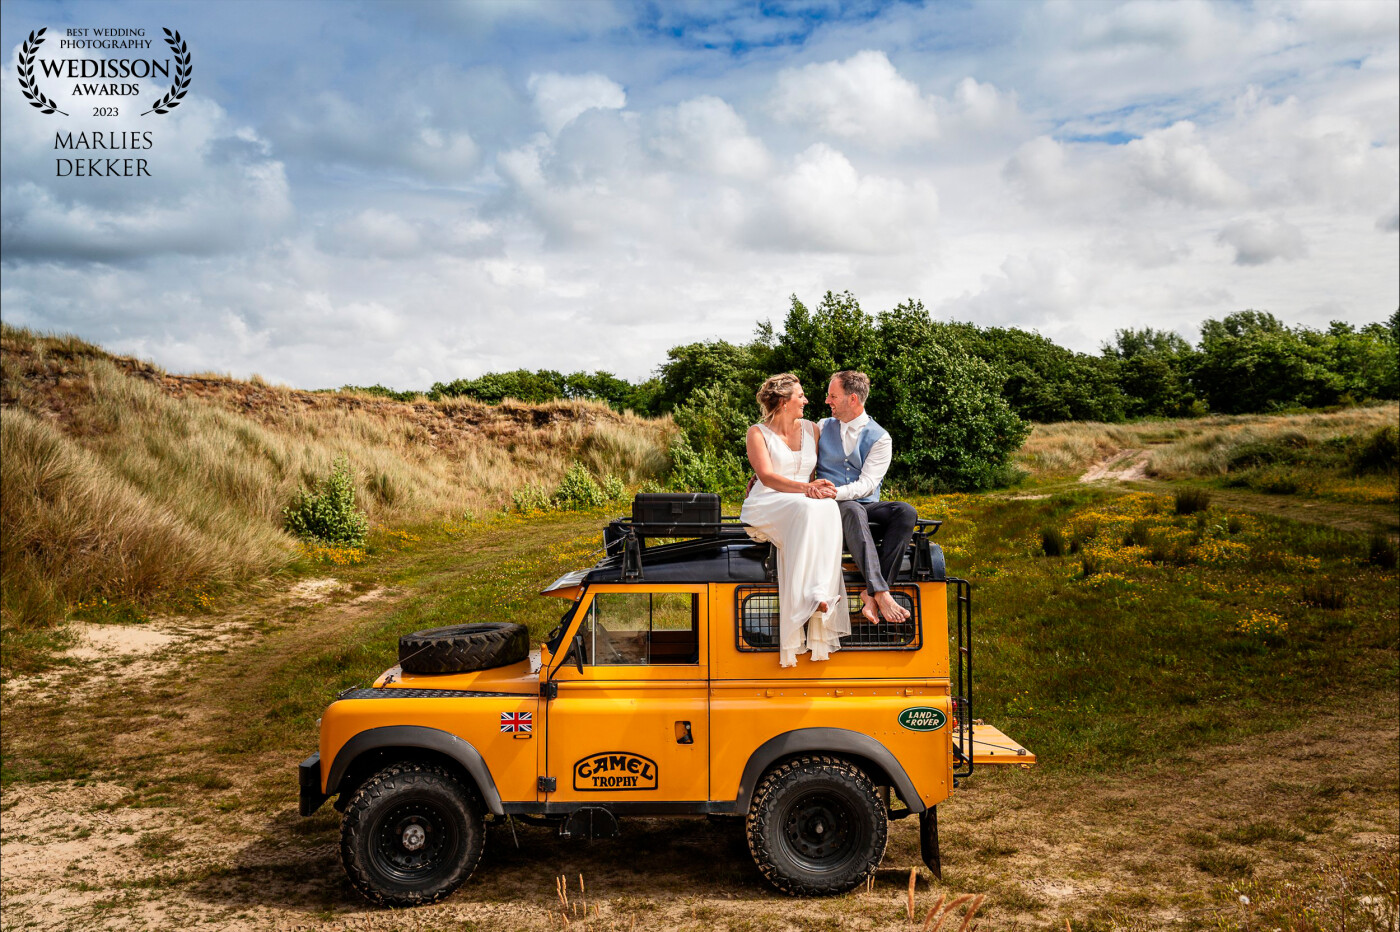 As a Land Rover Defender driver i got in contact with this couple years ago. <br />
The couple has the same passion for old Land Rover series and defenders. So i was very happy that they got married in their old 'fellow'. The dunes, the sky, the car, it all came together in one pic, which i really really love.